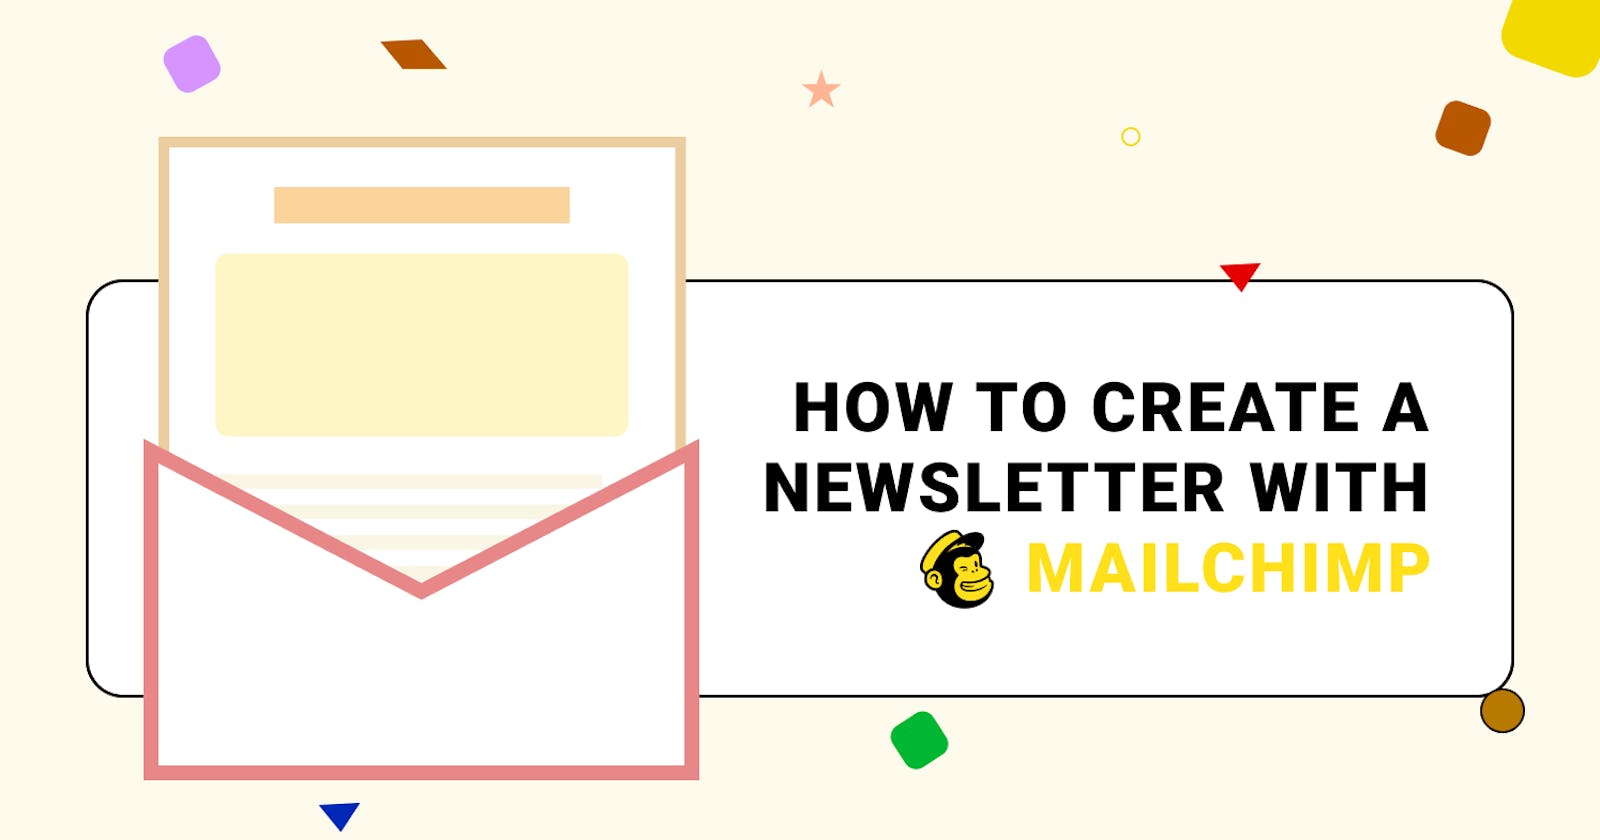 How to create a newsletter with Mailchimp (not affiliated/ad).